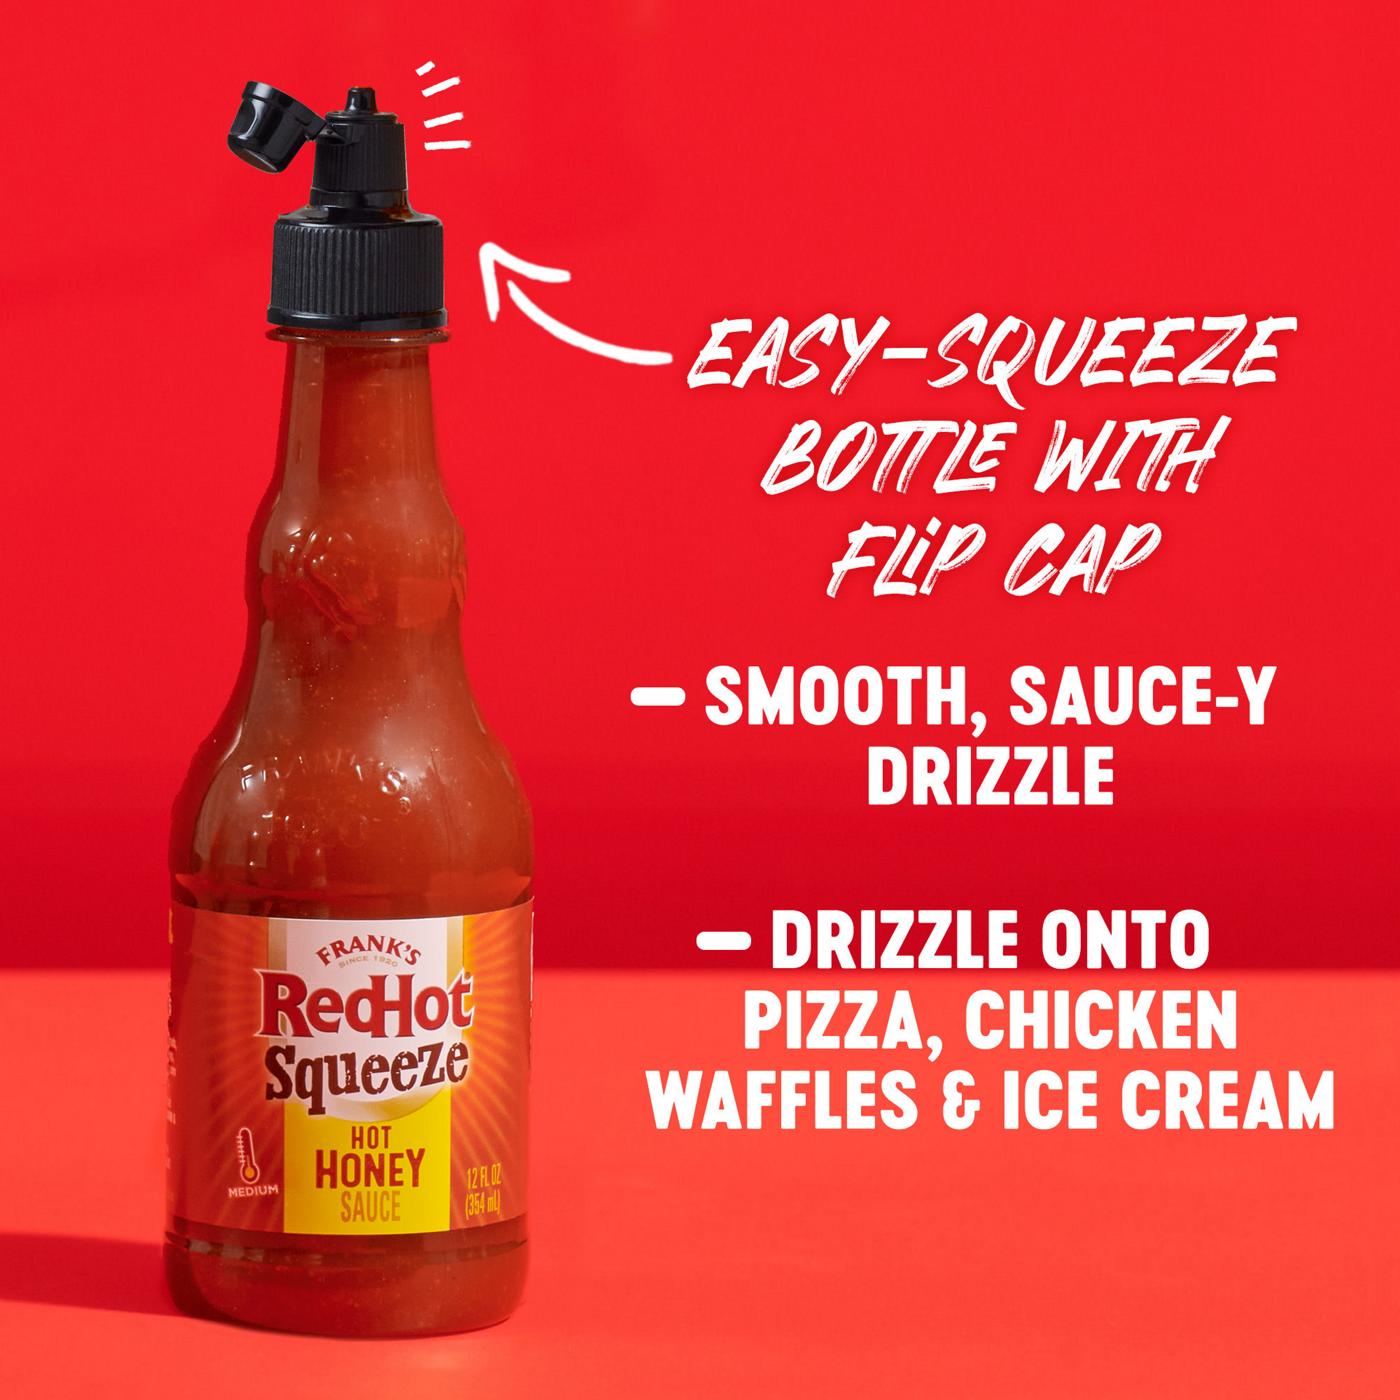 Frank's RedHot Hot Honey Squeeze Hot Sauce; image 6 of 7